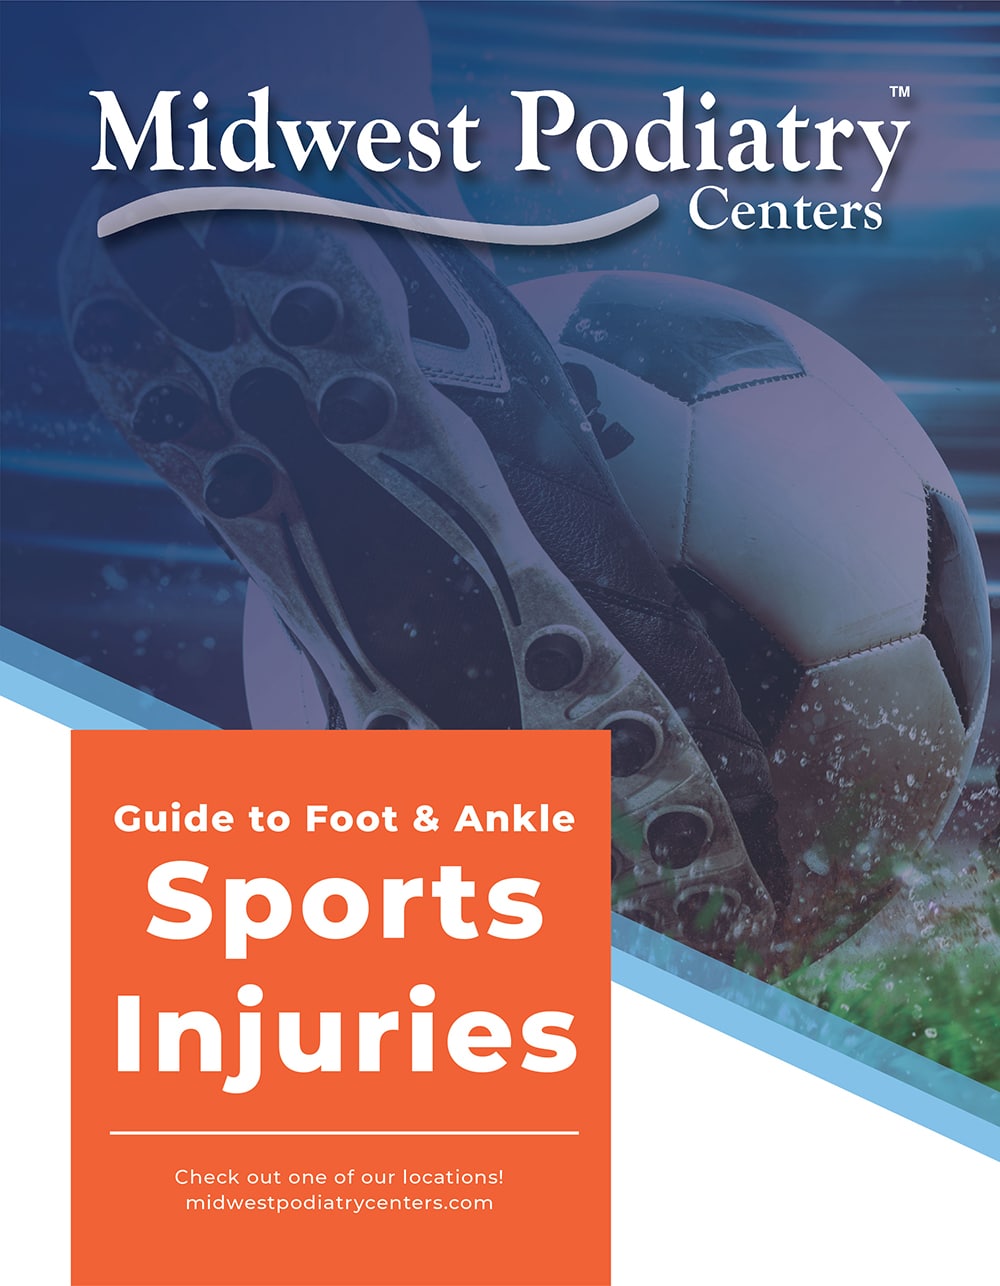 Guide to Foot and Ankle Sports Injuries